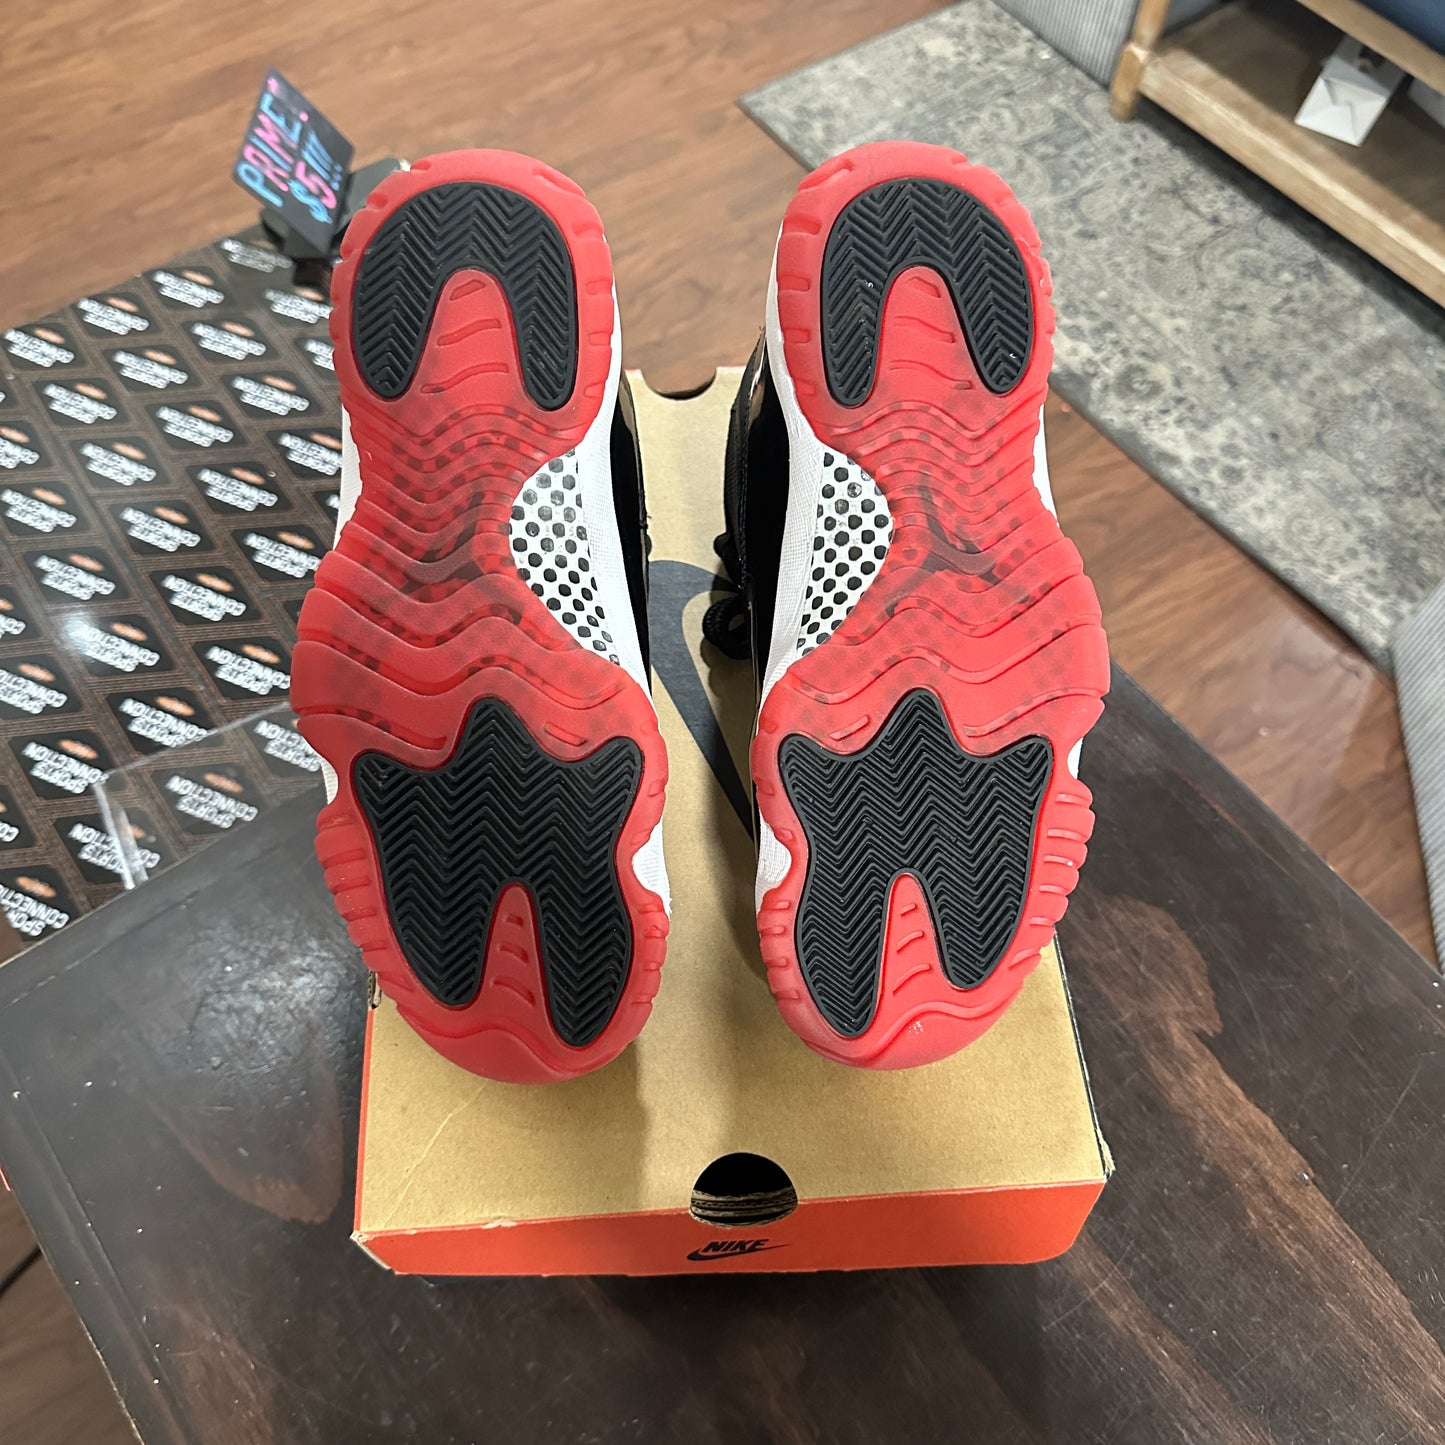 *USED* Air Jordan 11 Playoff Bred (2019) (size 8)